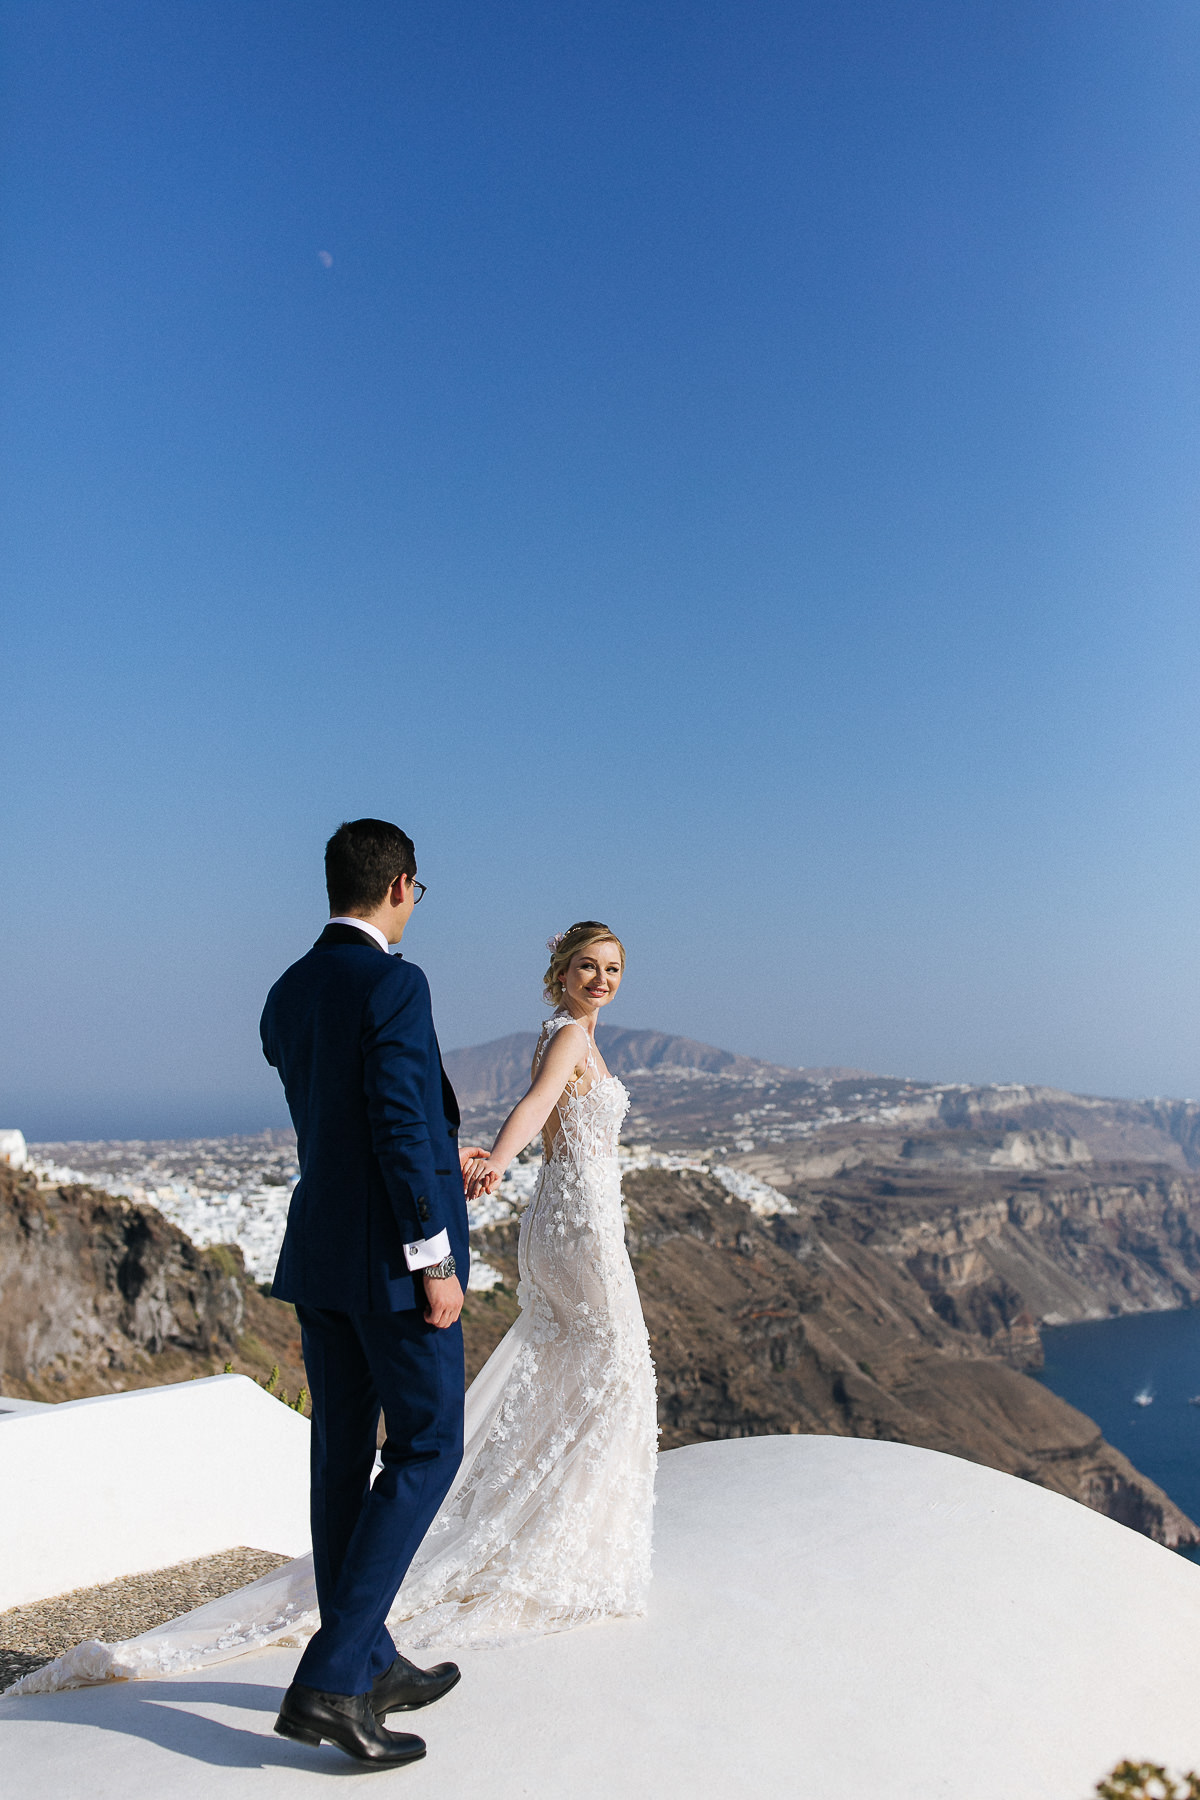 editorial style wedding photography in Greece